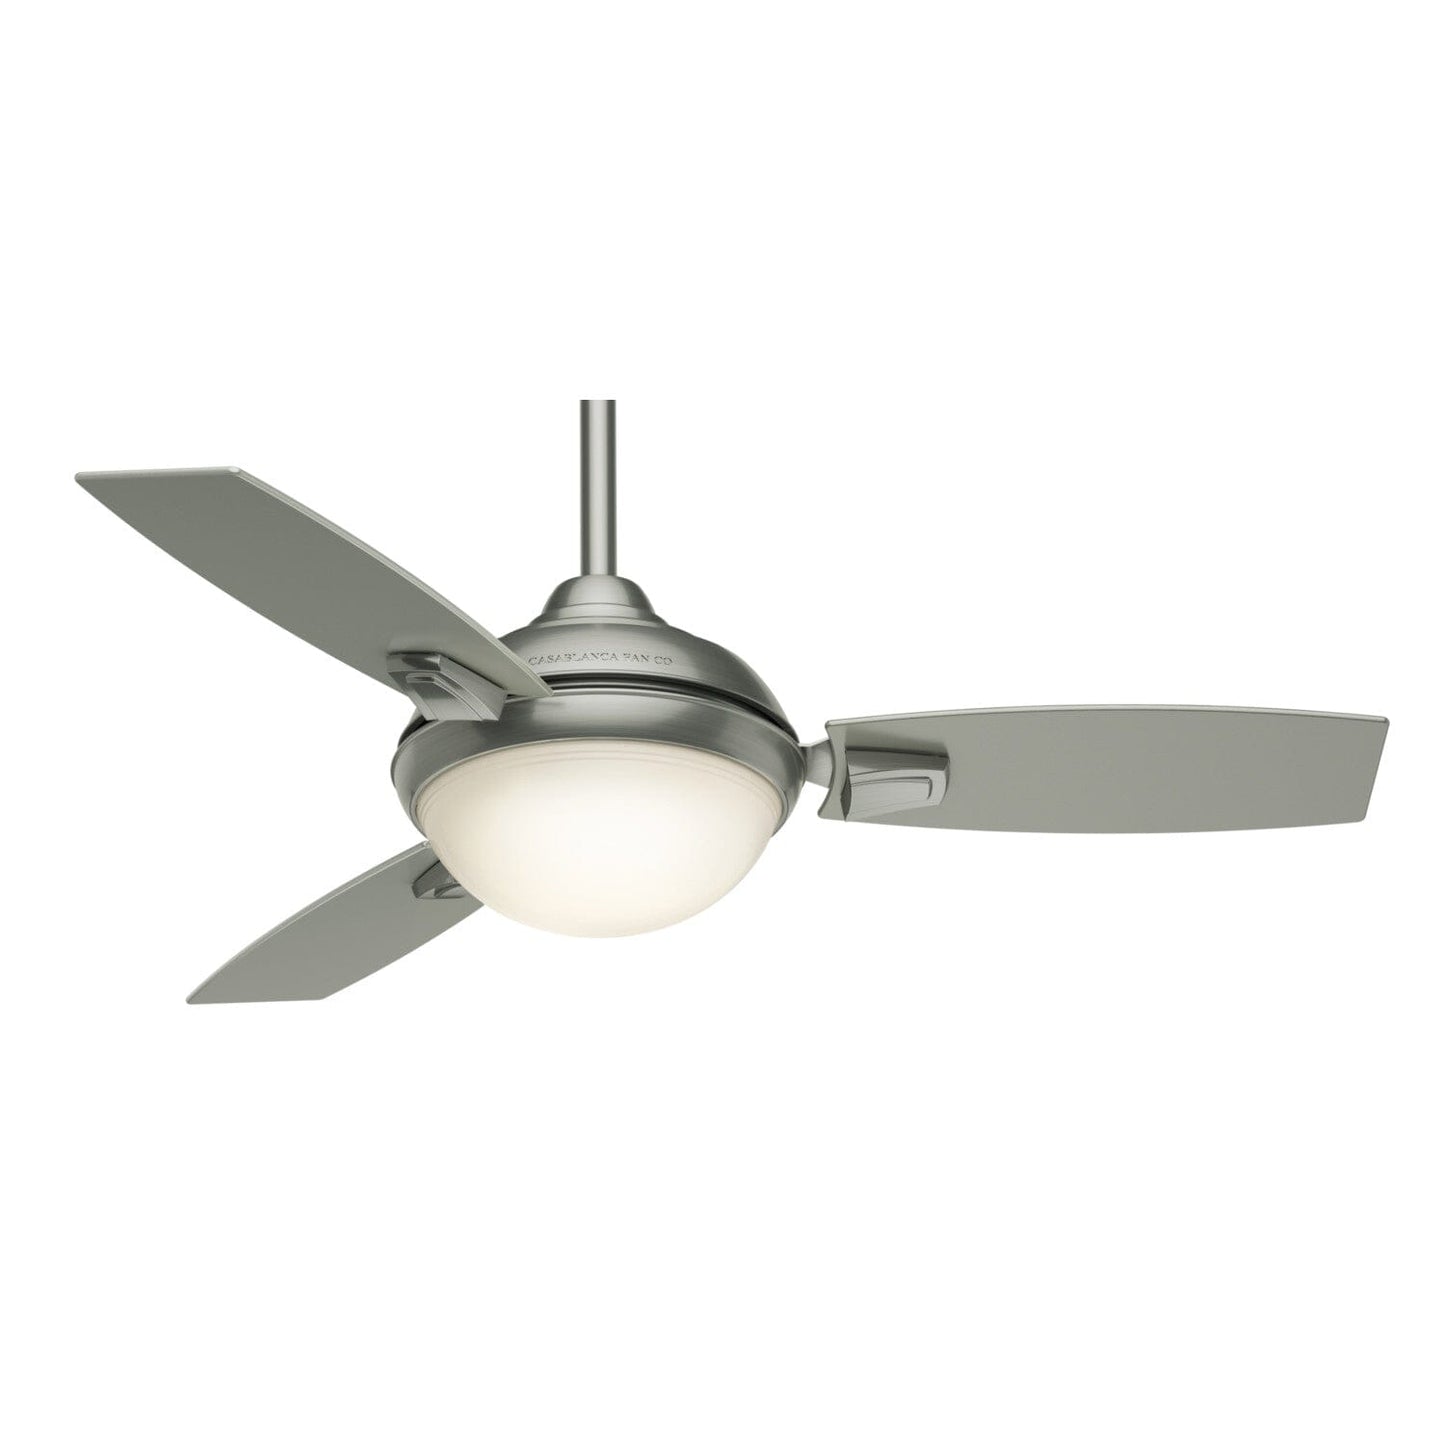 44 inch Verse Outdoor with LED Light and Remote Control Ceiling Fans Casablanca Brushed Nickel - Casa Platinum 